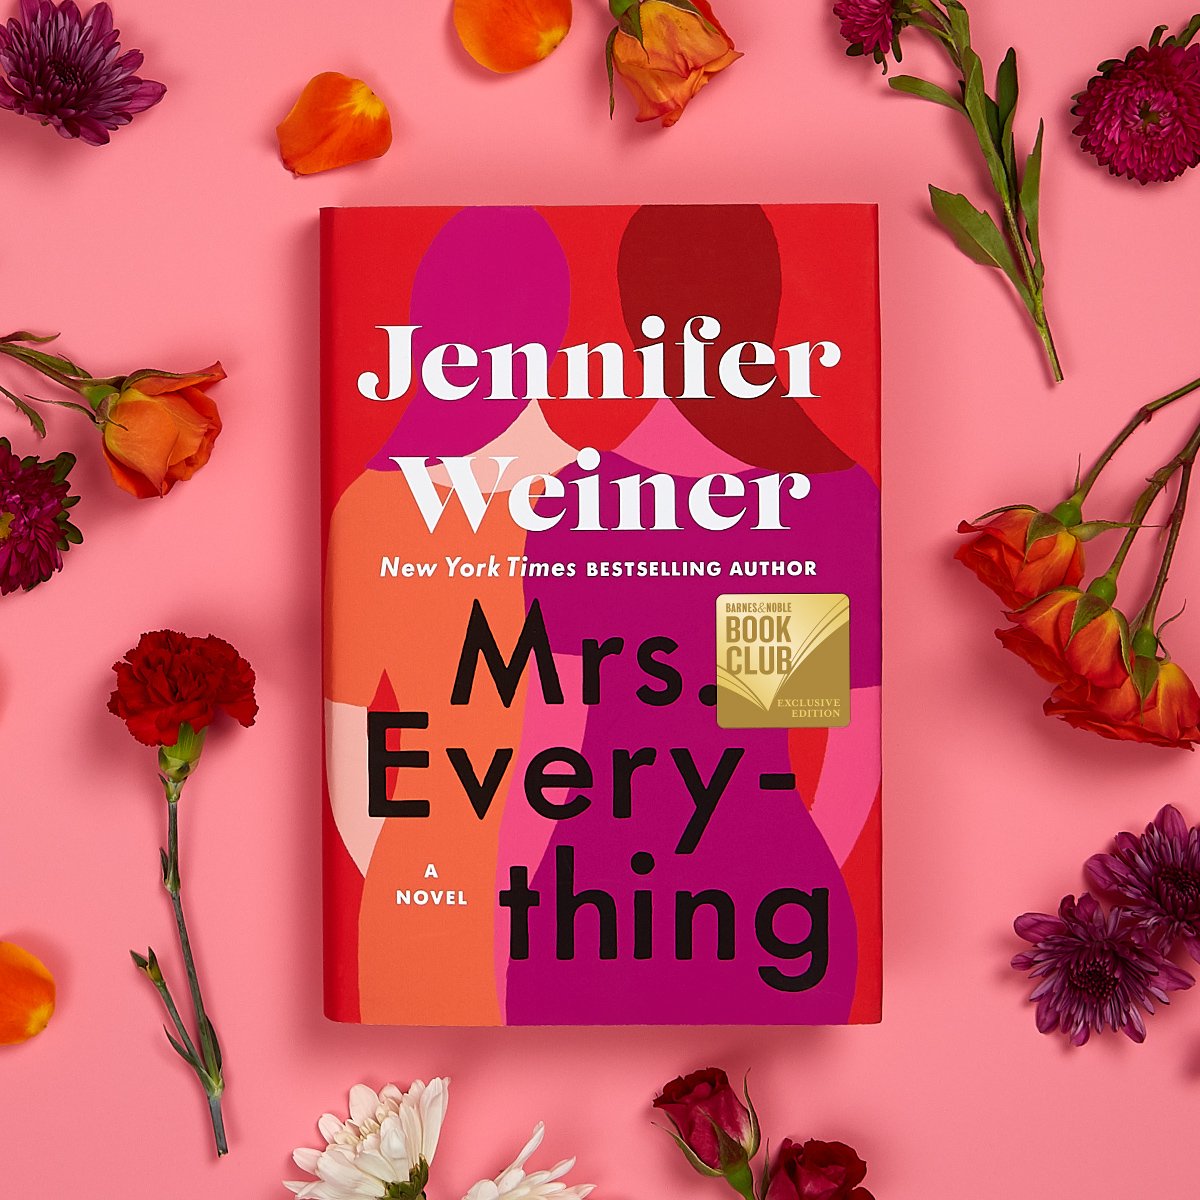 @jenniferweiner, author of #BNBookClub pick MRS. EVERYTHING, talks on the #BNPodcast about her family, what it means when your mother might see herself in your fiction, & her determination to tell stories that reflect the truth of women’s experience: barnesandnoble.com/review/jennife…